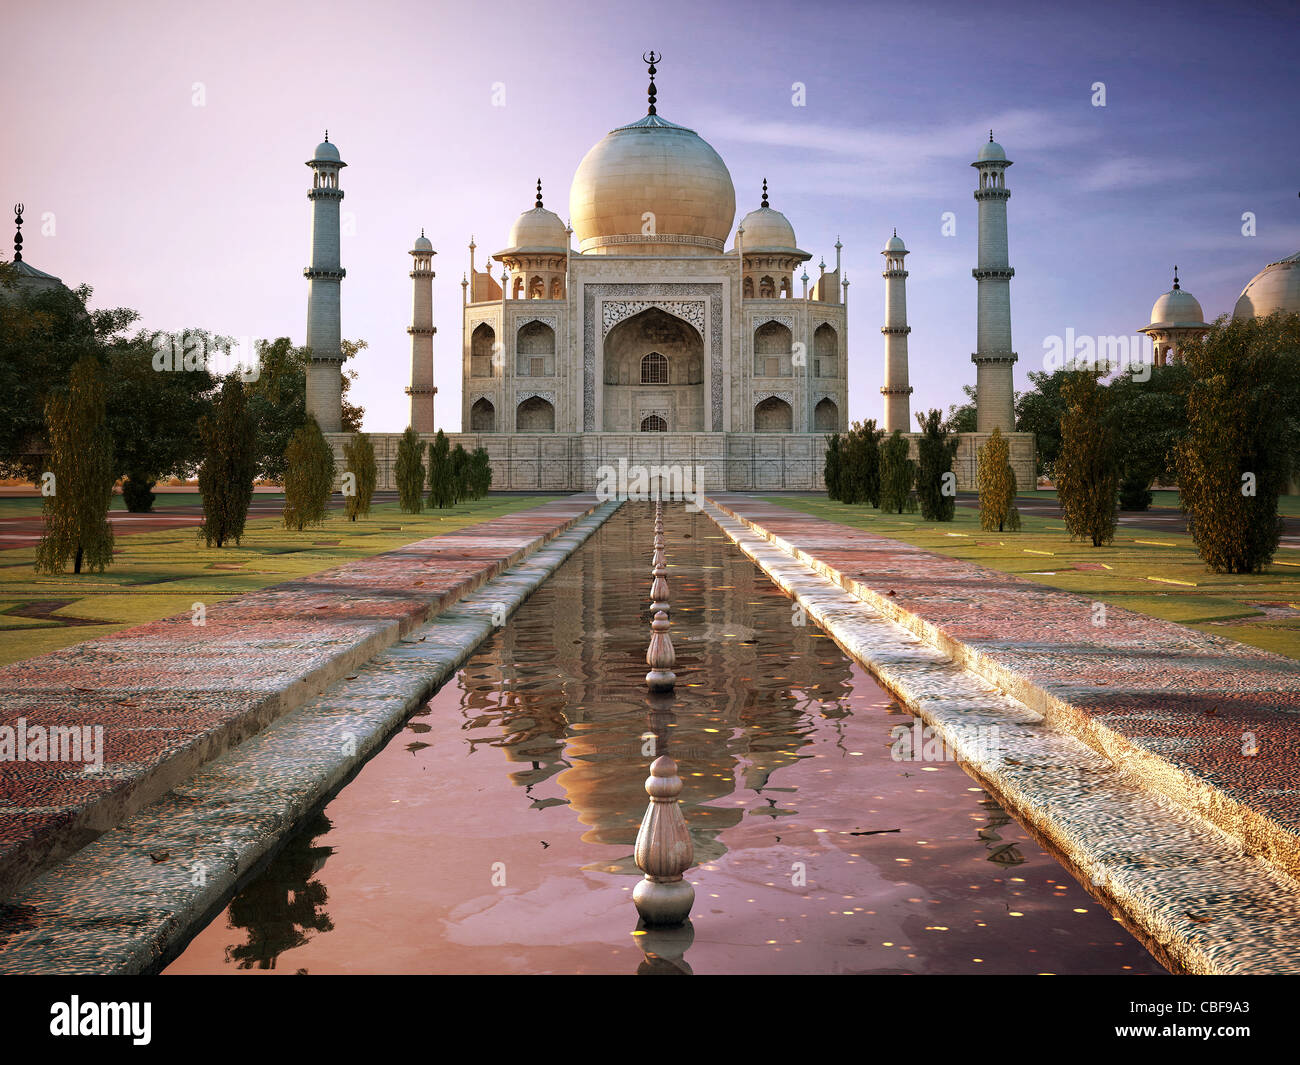 Taj Mahal at sunset time, view from the front, centered on the pool, with garden on the sides. Stock Photo